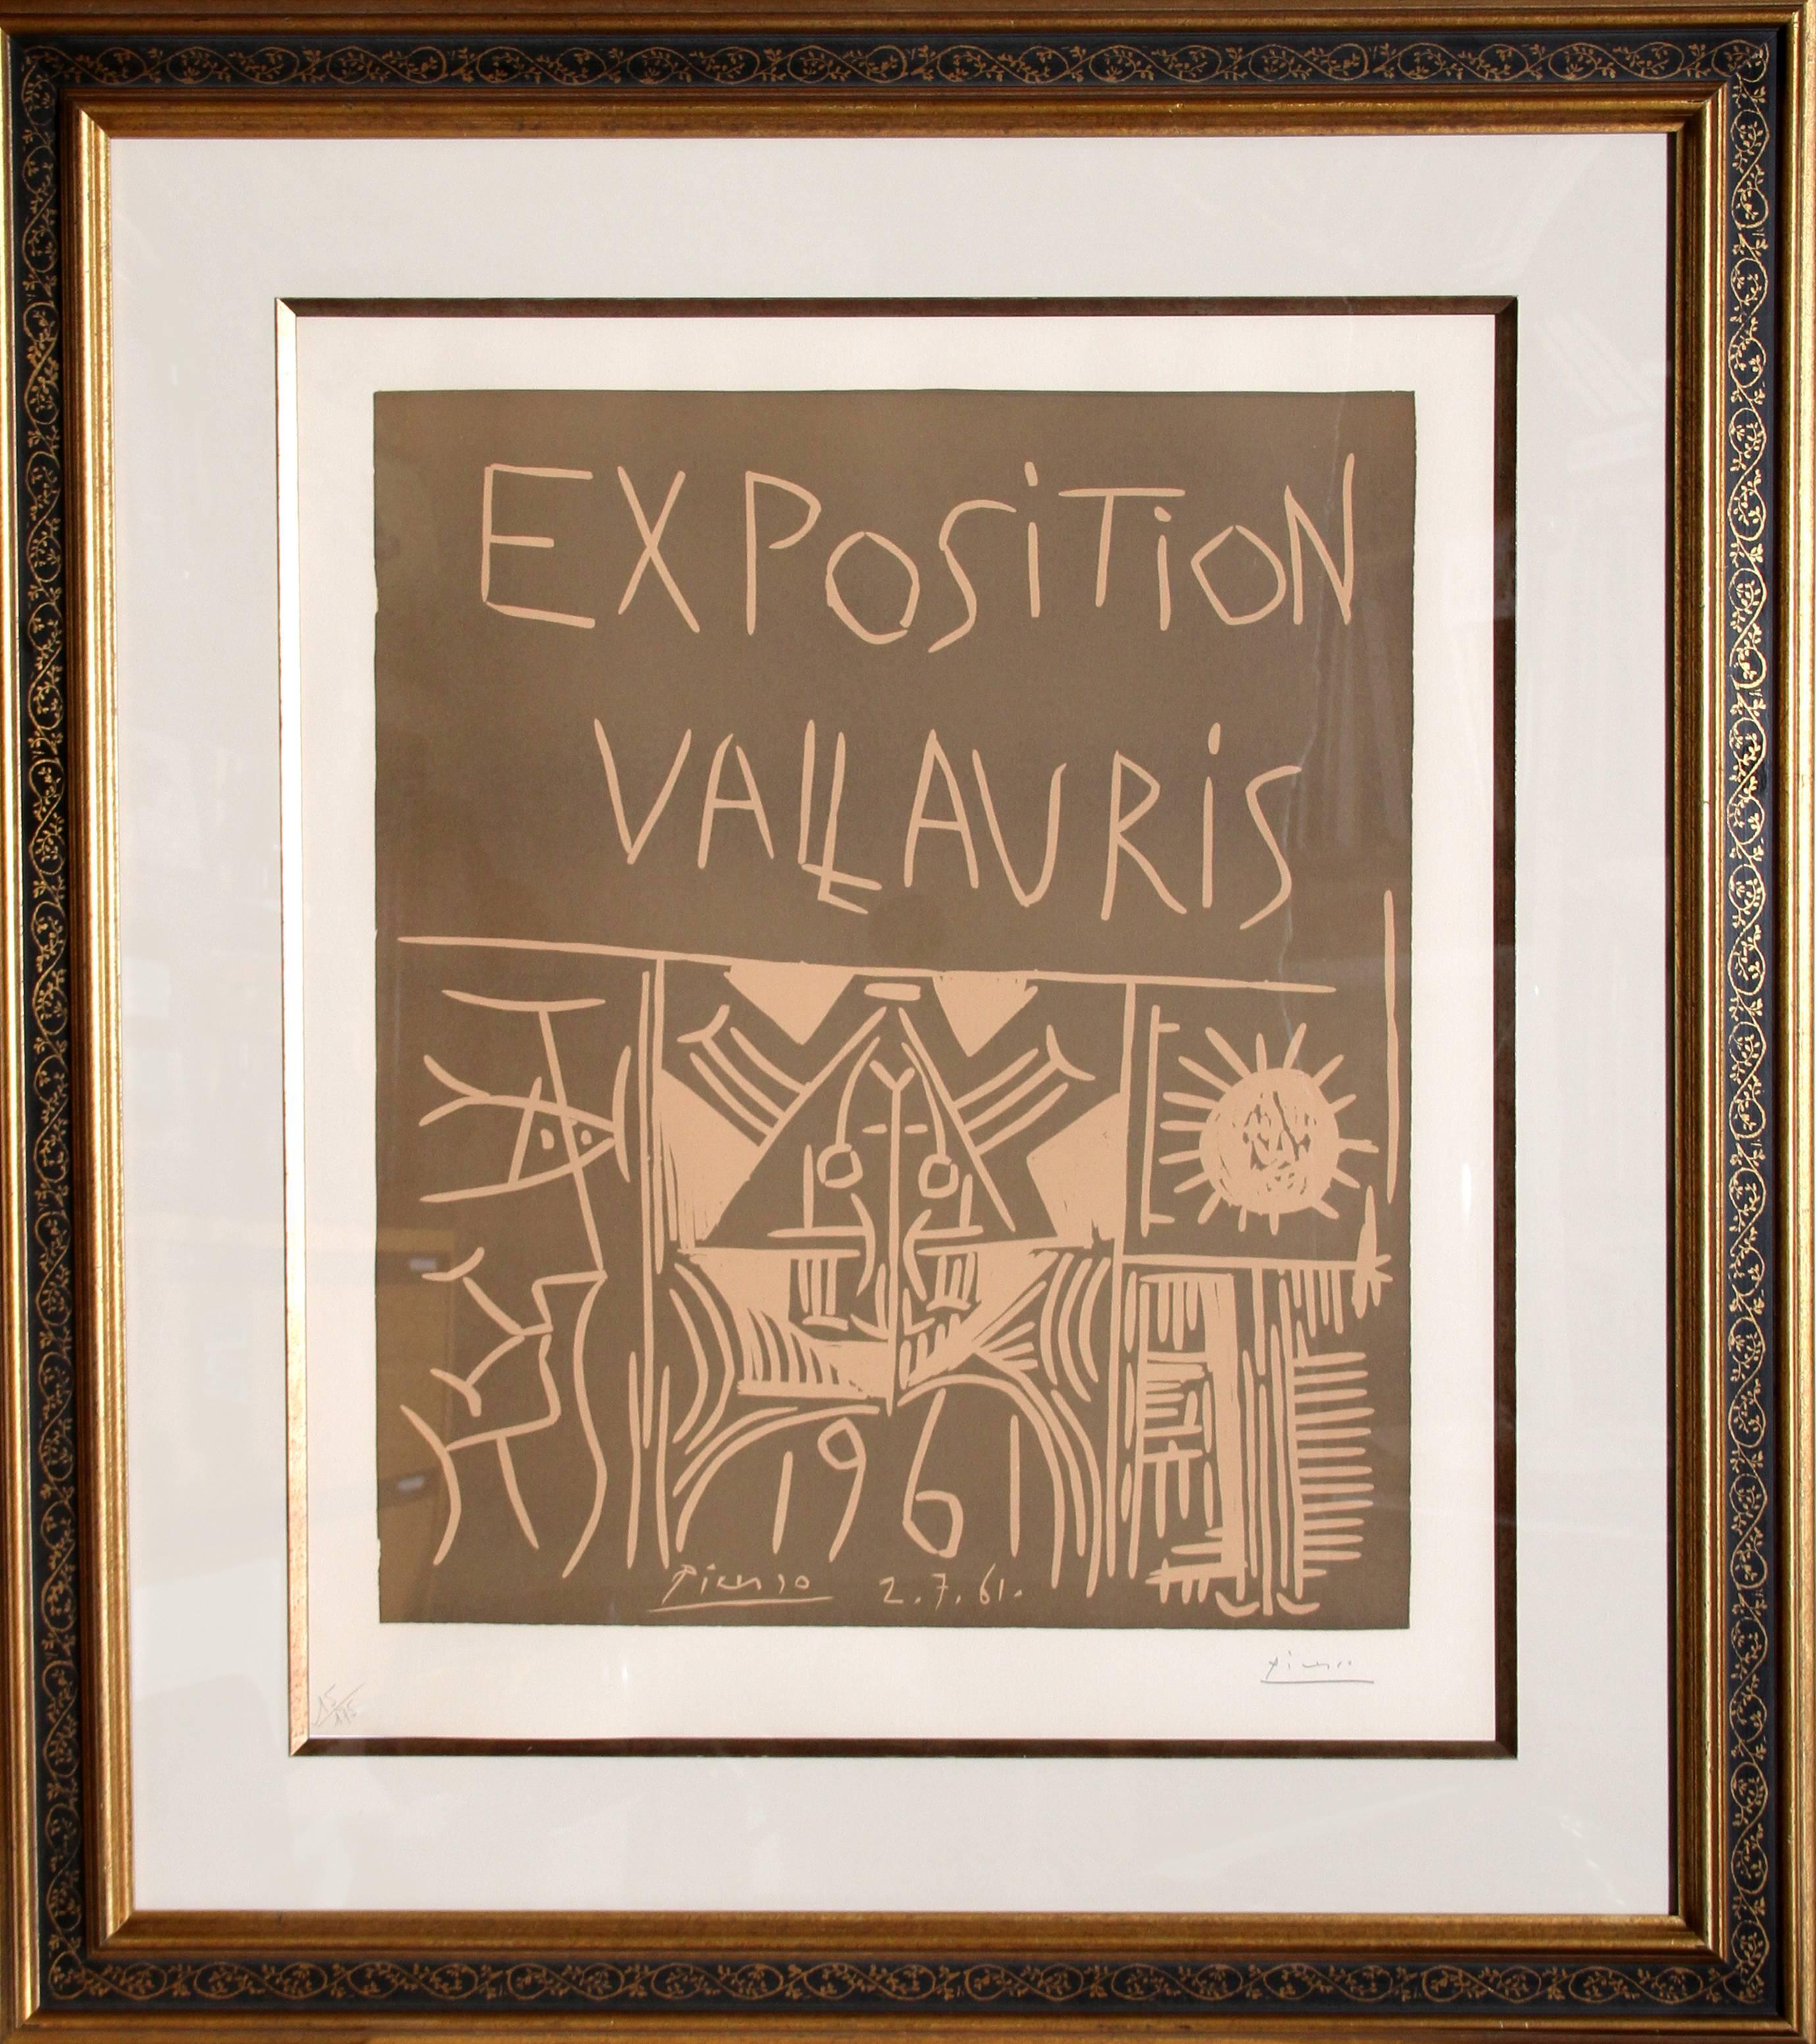 Pablo Picasso Abstract Print - Exposition Vallauris (Bloch 1295)